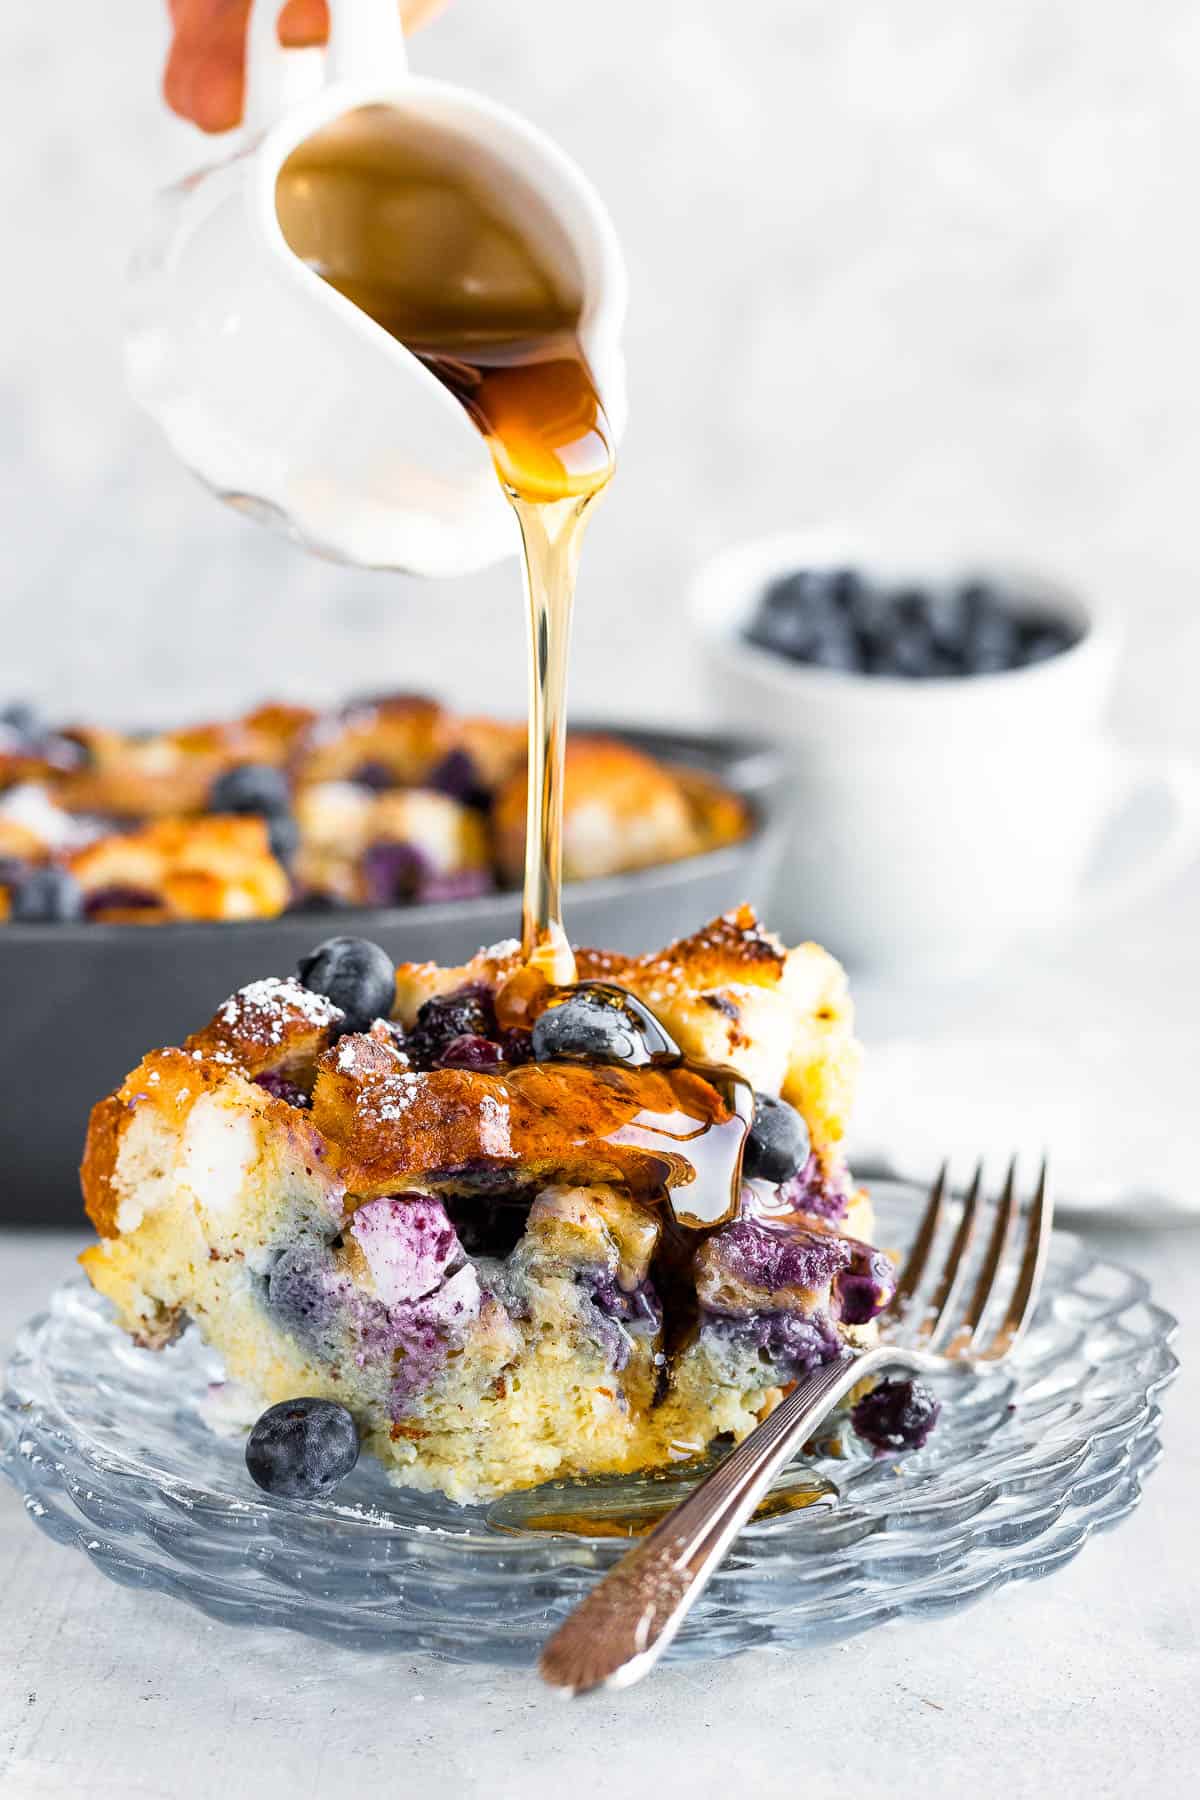 A Spouted Measuring Cup Drizzling Maple Syrup Over a Piece of French Toast Casserole